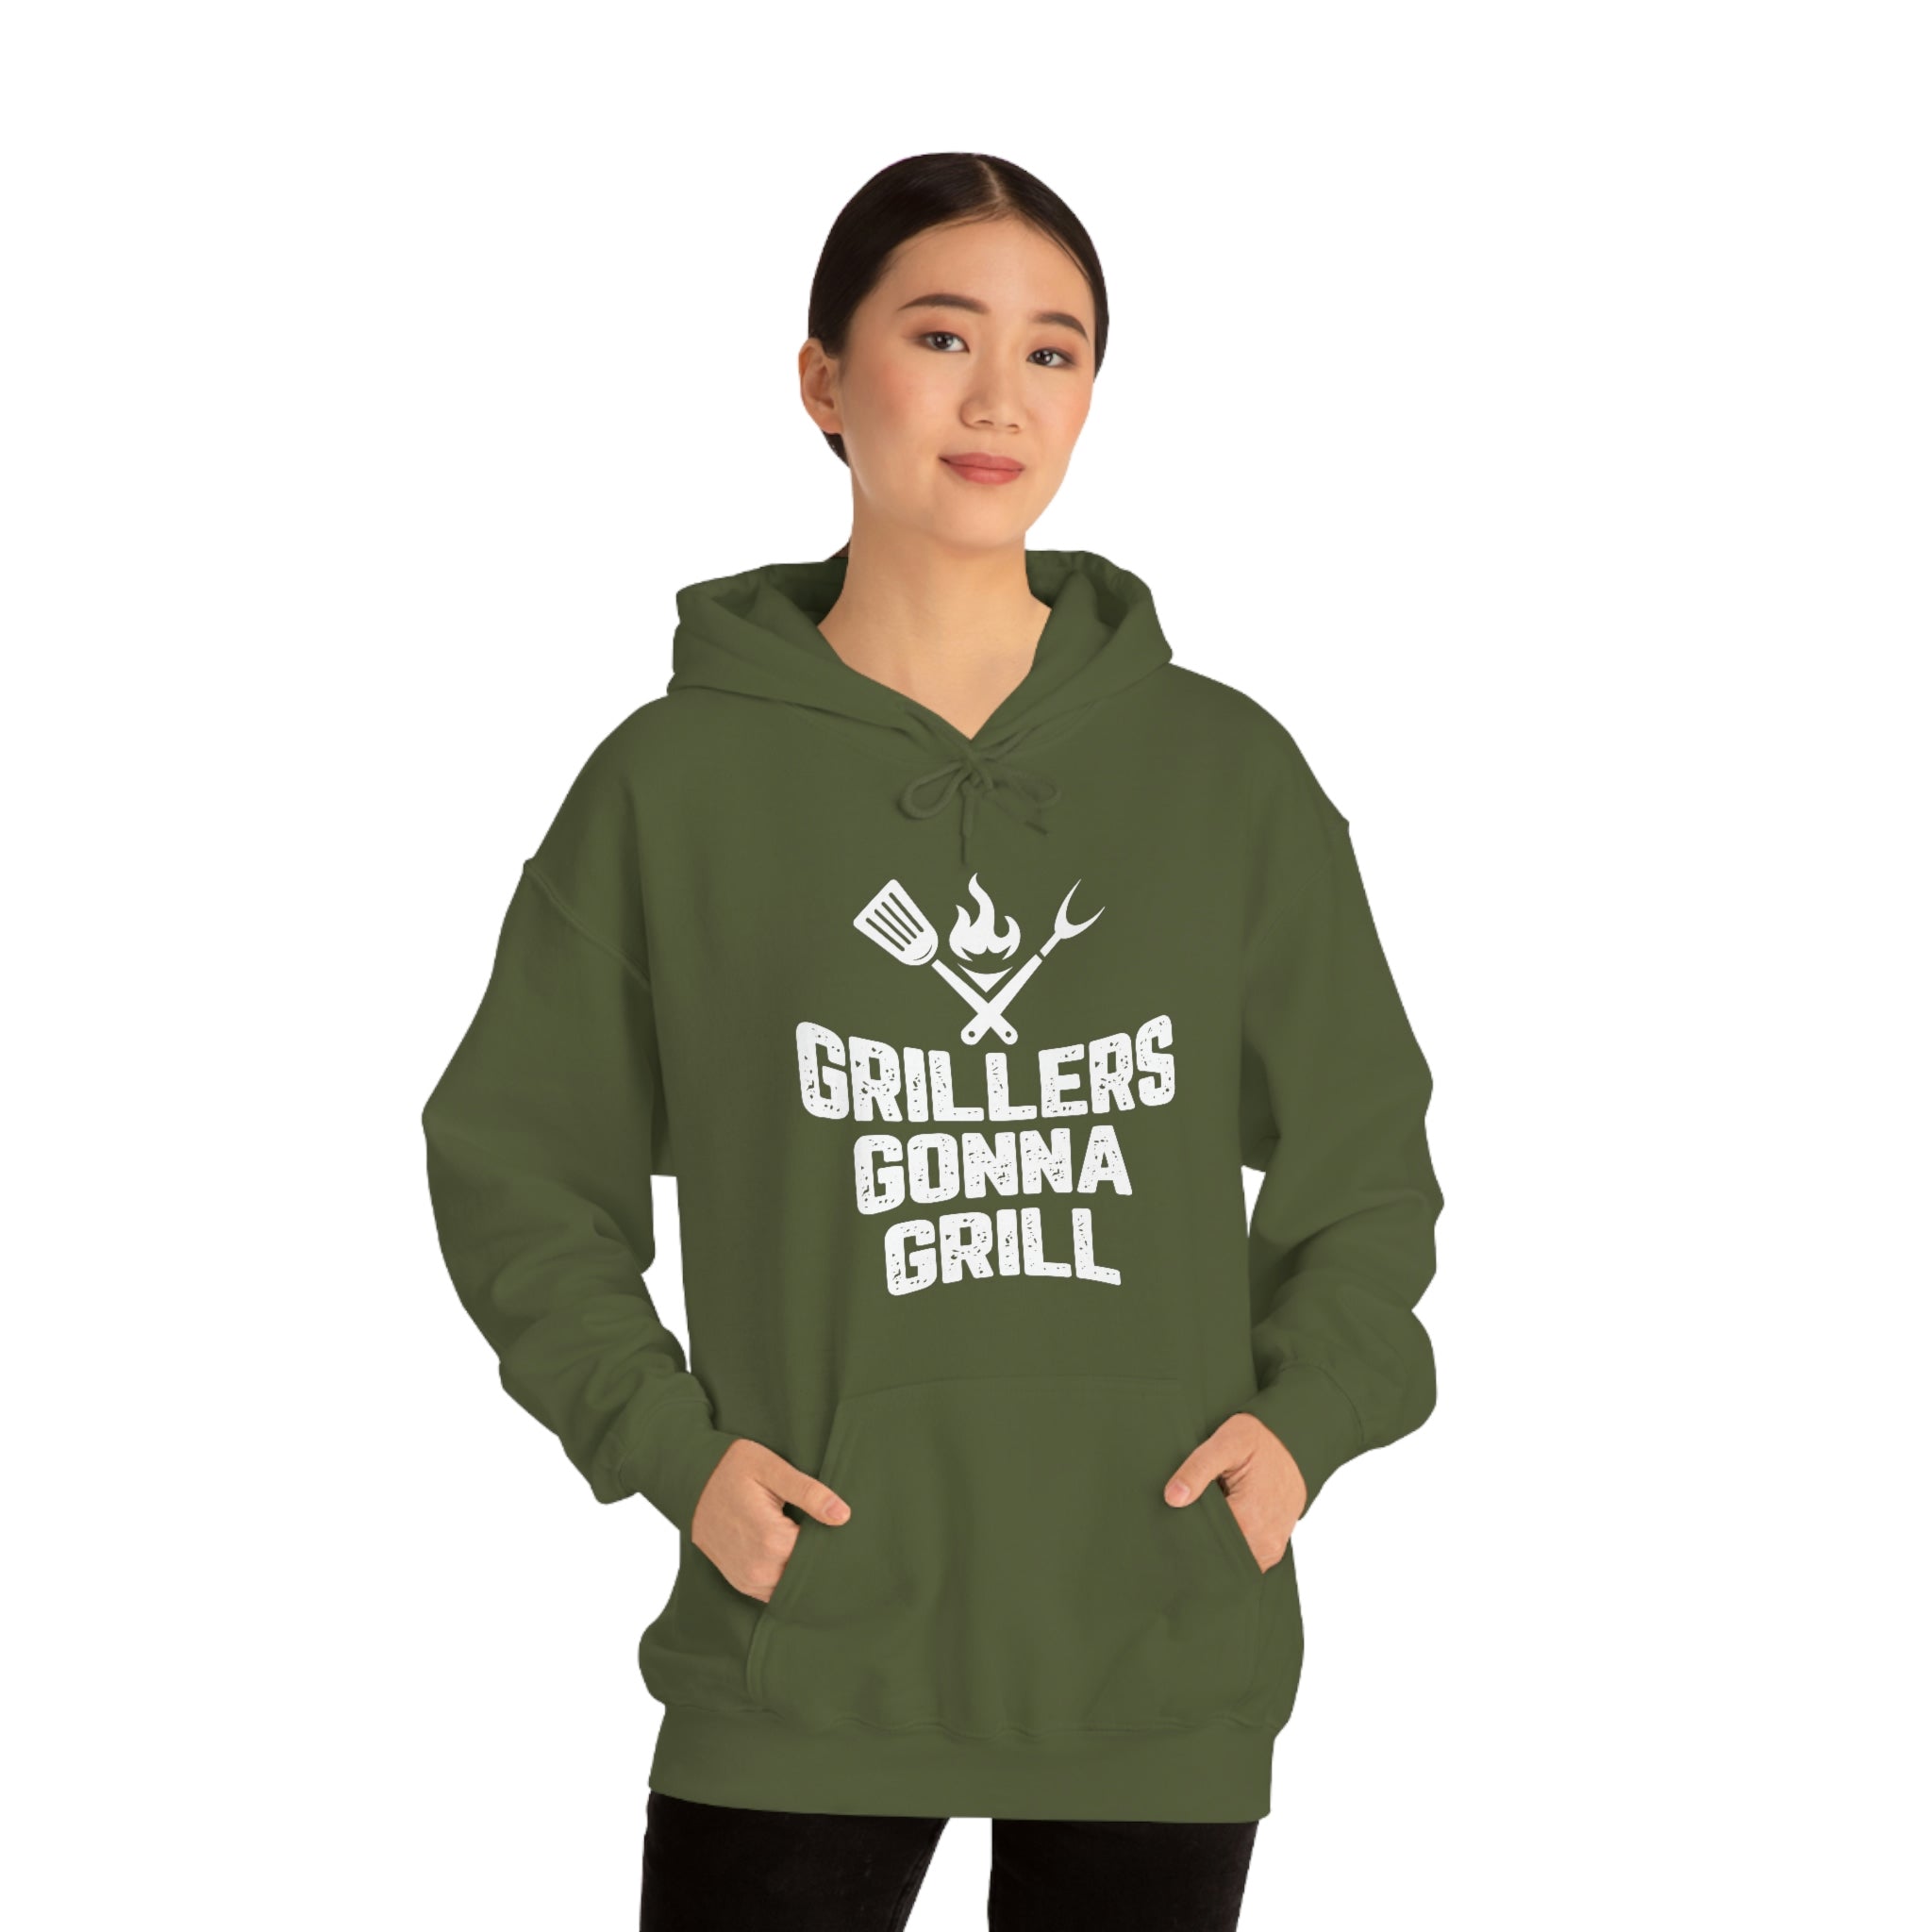 Grillers Gonna Grill hooded sweatshirt